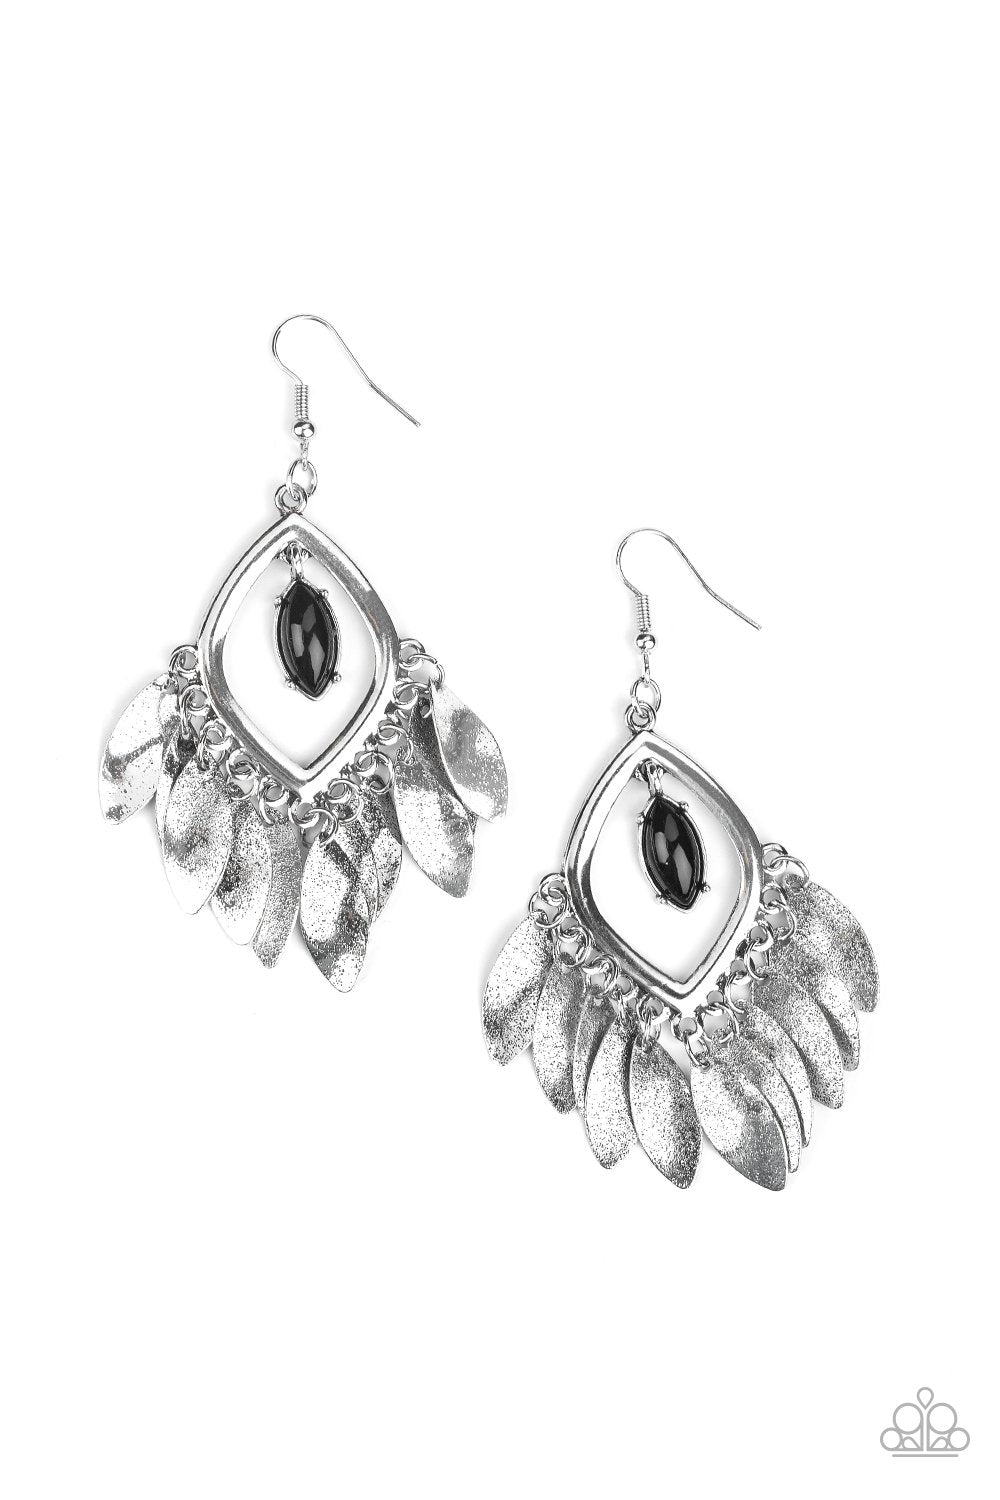 Sunset Soul Black and Silver Earrings - Paparazzi Accessories-CarasShop.com - $5 Jewelry by Cara Jewels